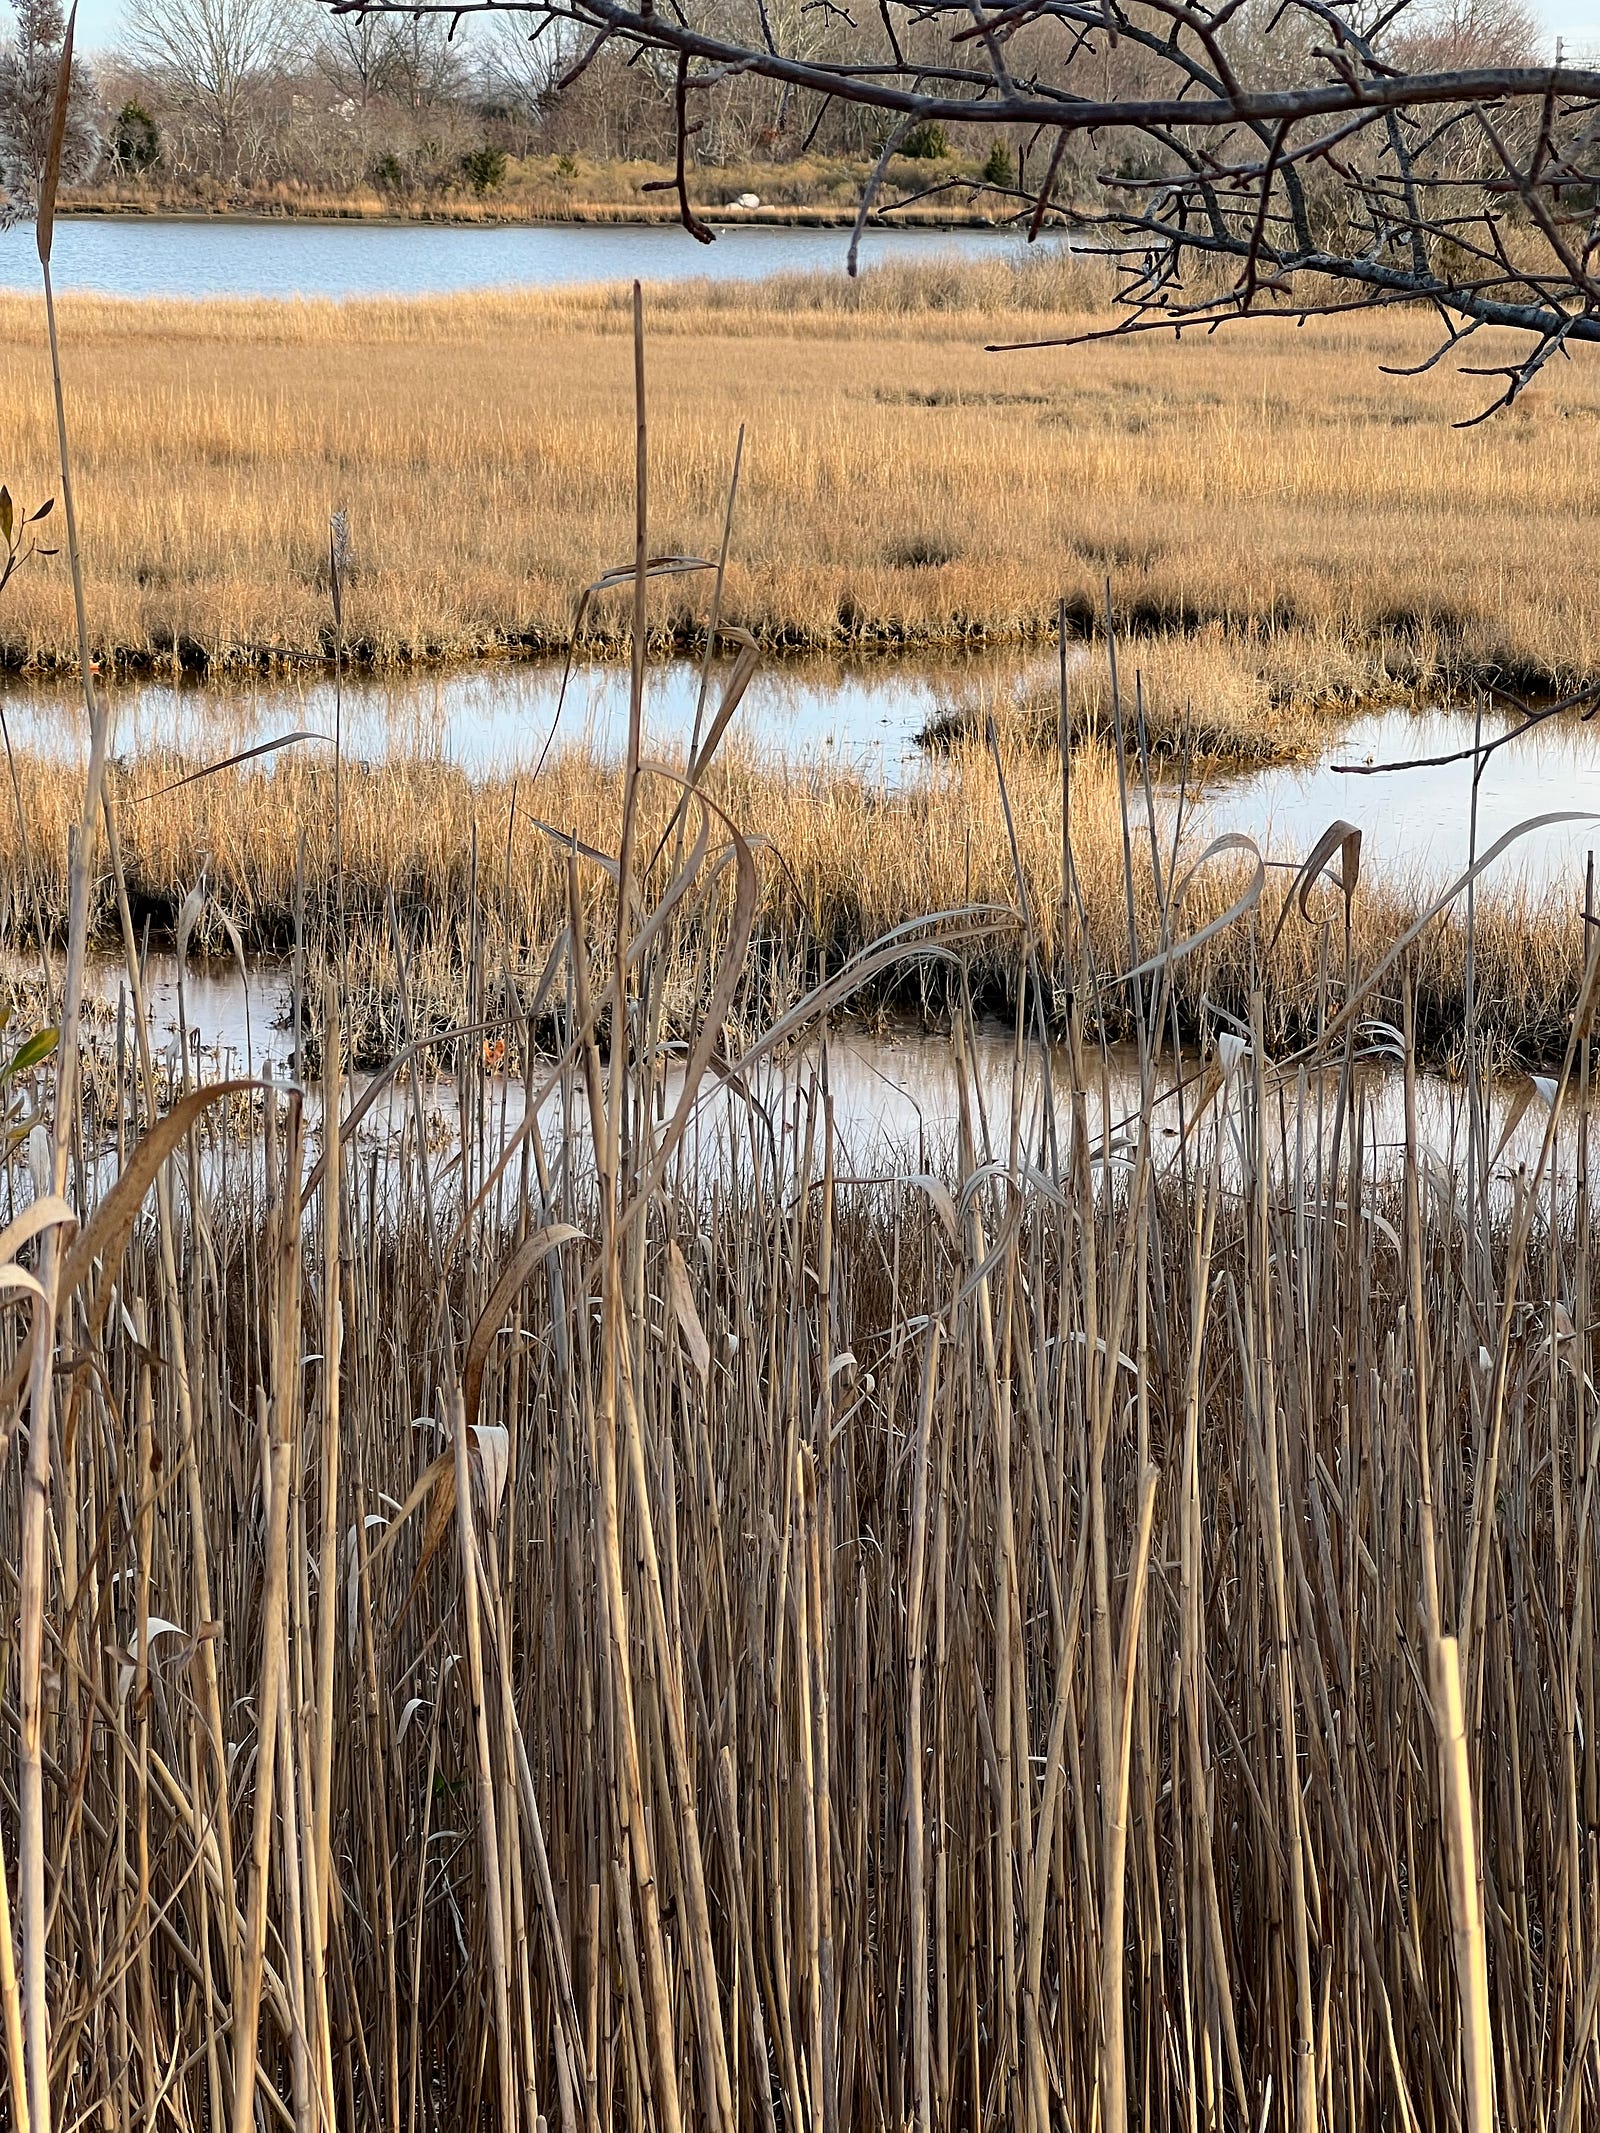 Salt marsh grasses in winter seen through the remains of tall phragmites stems at Haley Farm State Park, Groton, CT